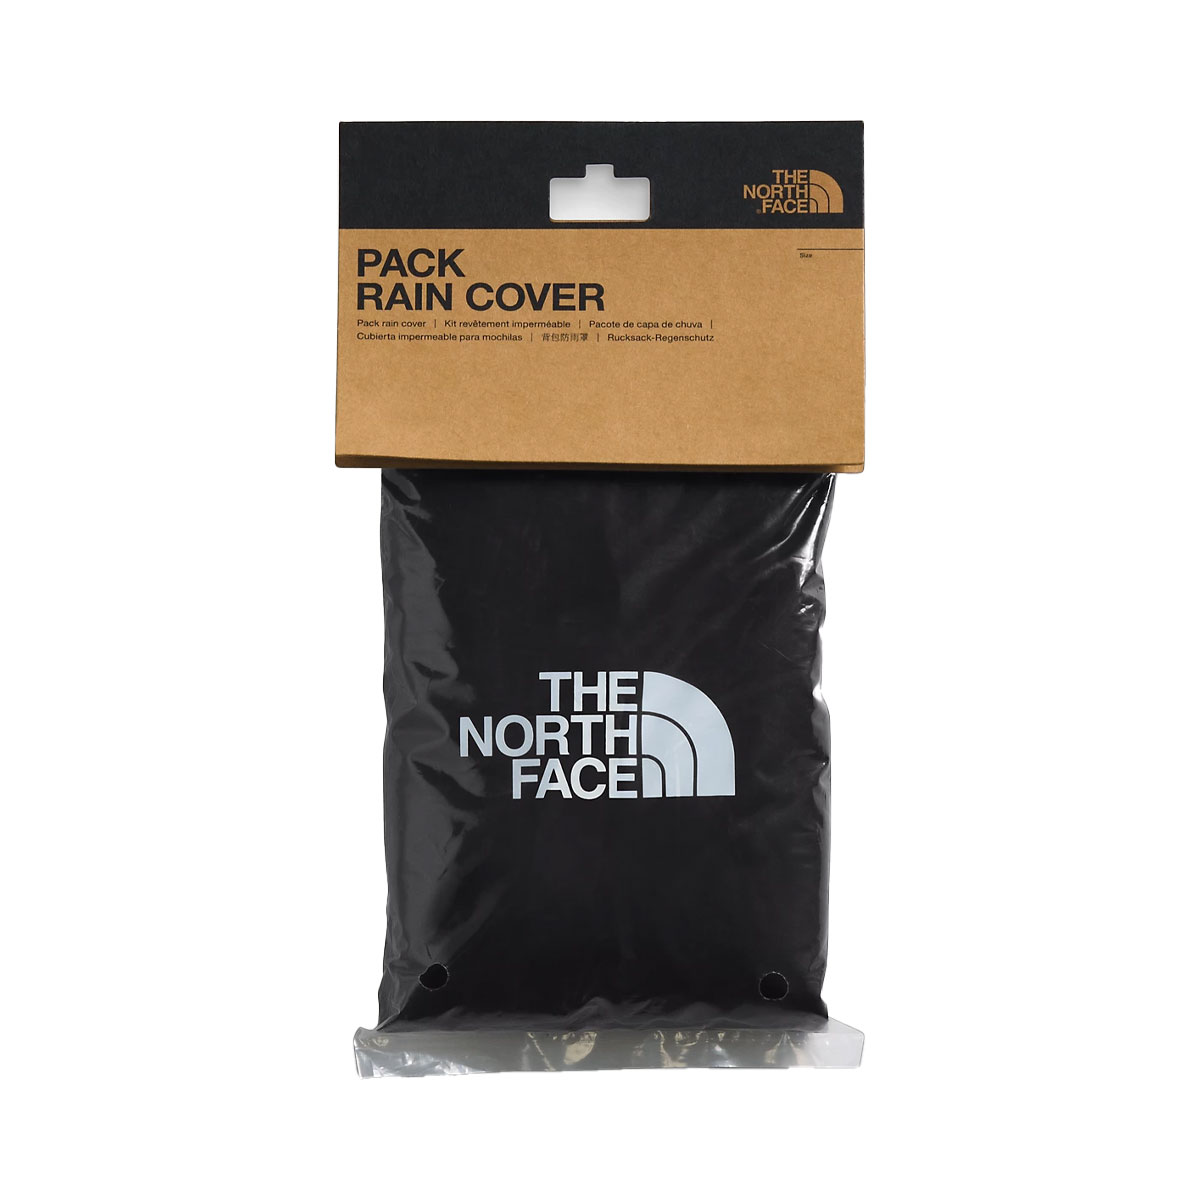 THE NORTH FACE - PACK RAIN COVER TNF BLACK